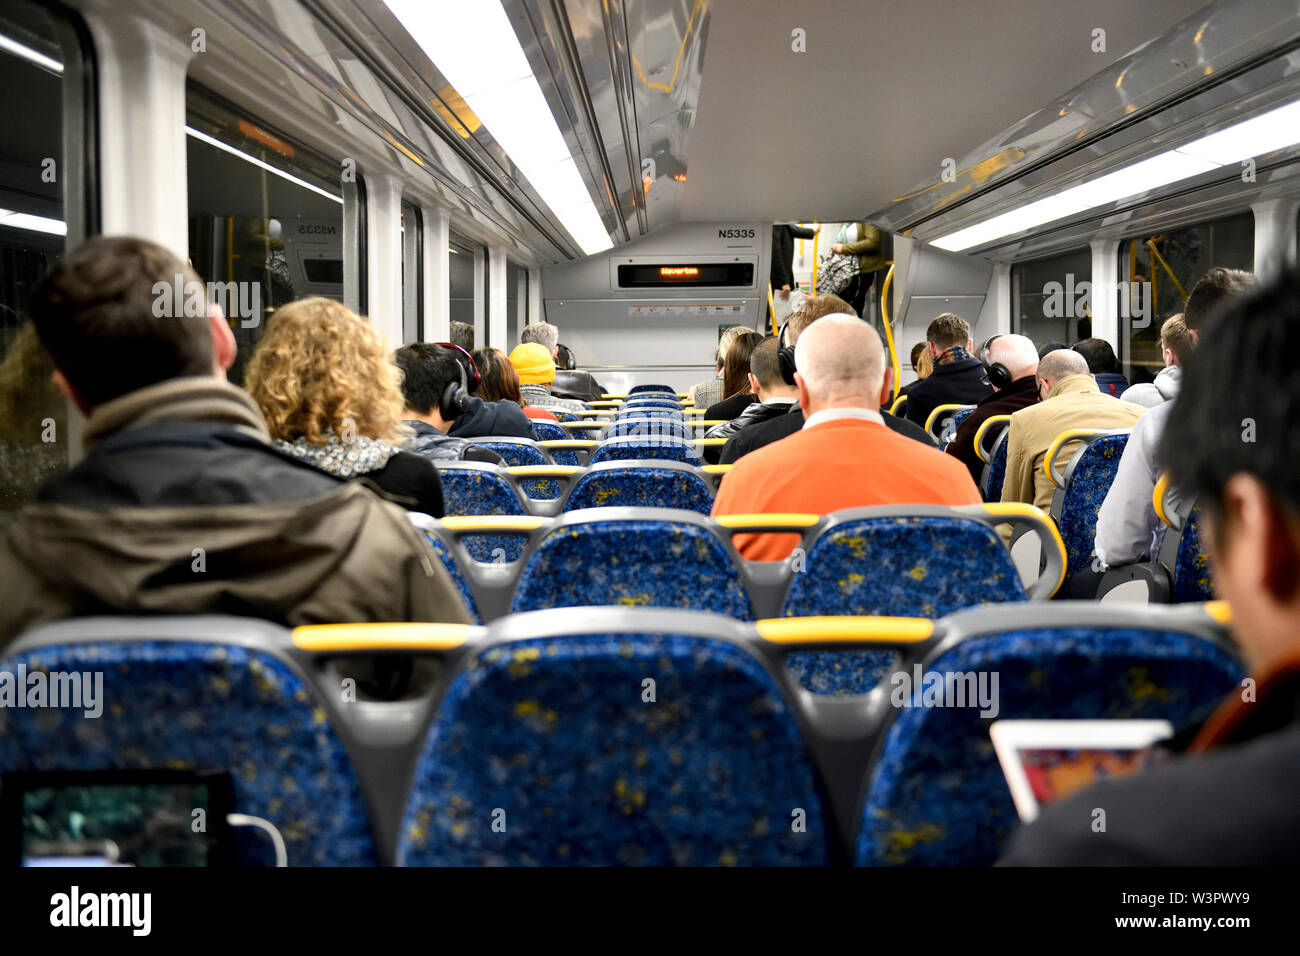 Commuters on a train, all leaving a seat between themselves and the next person, thereby avoiding sitting next to strangers. Sydney, Australia Stock Photo